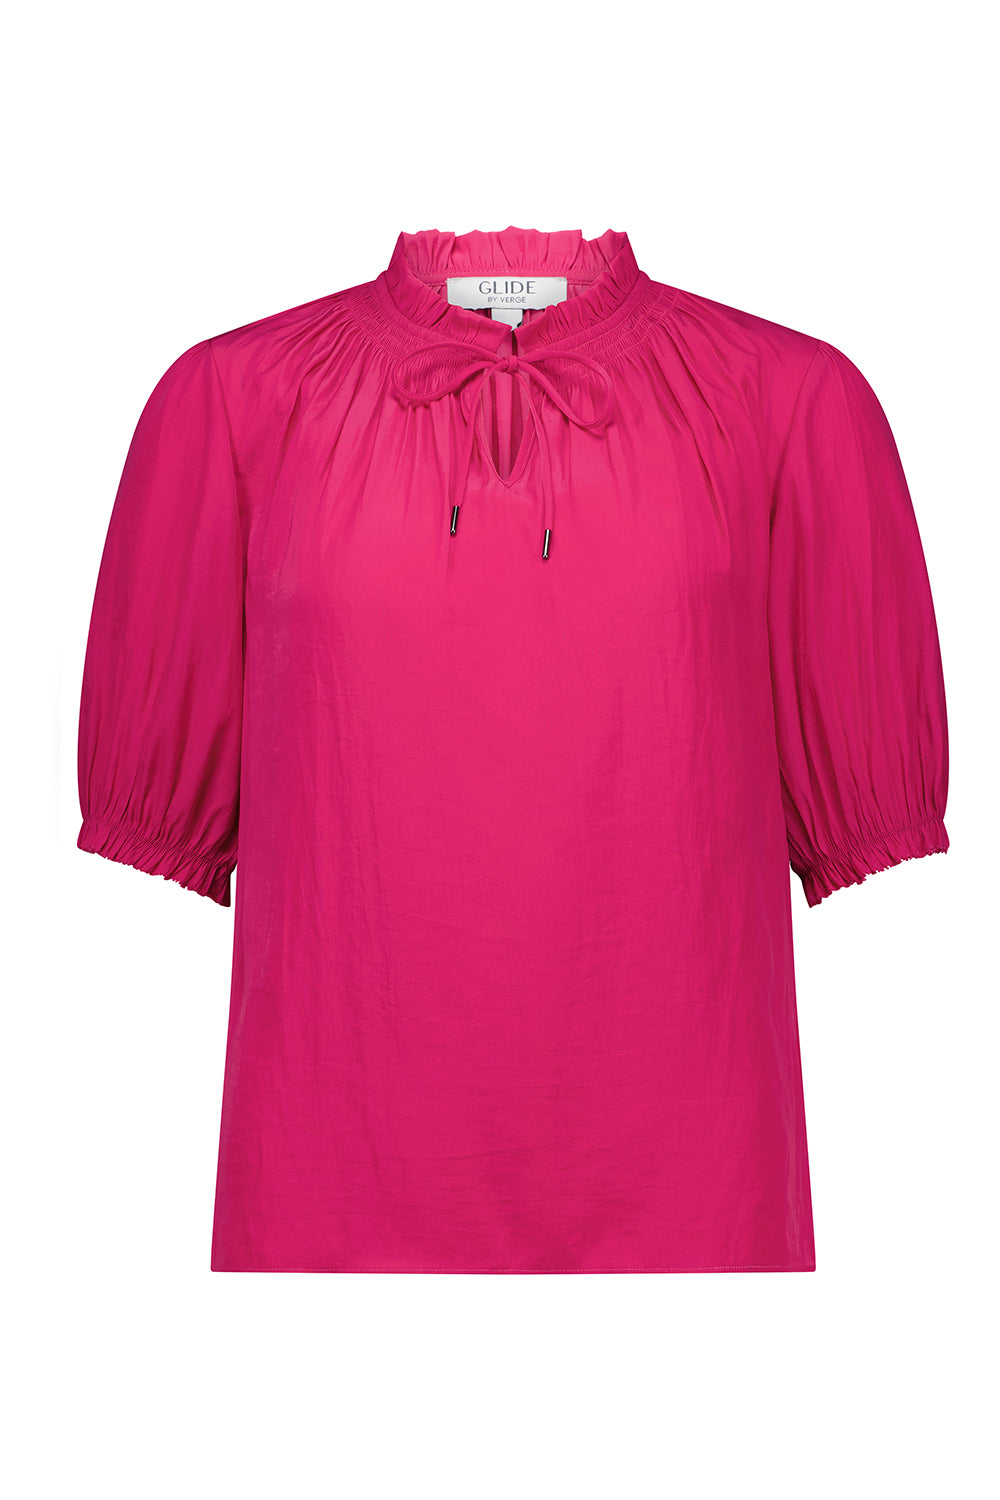 Glide by Verge - Reflection Top - Fuchsia - Top VERGE